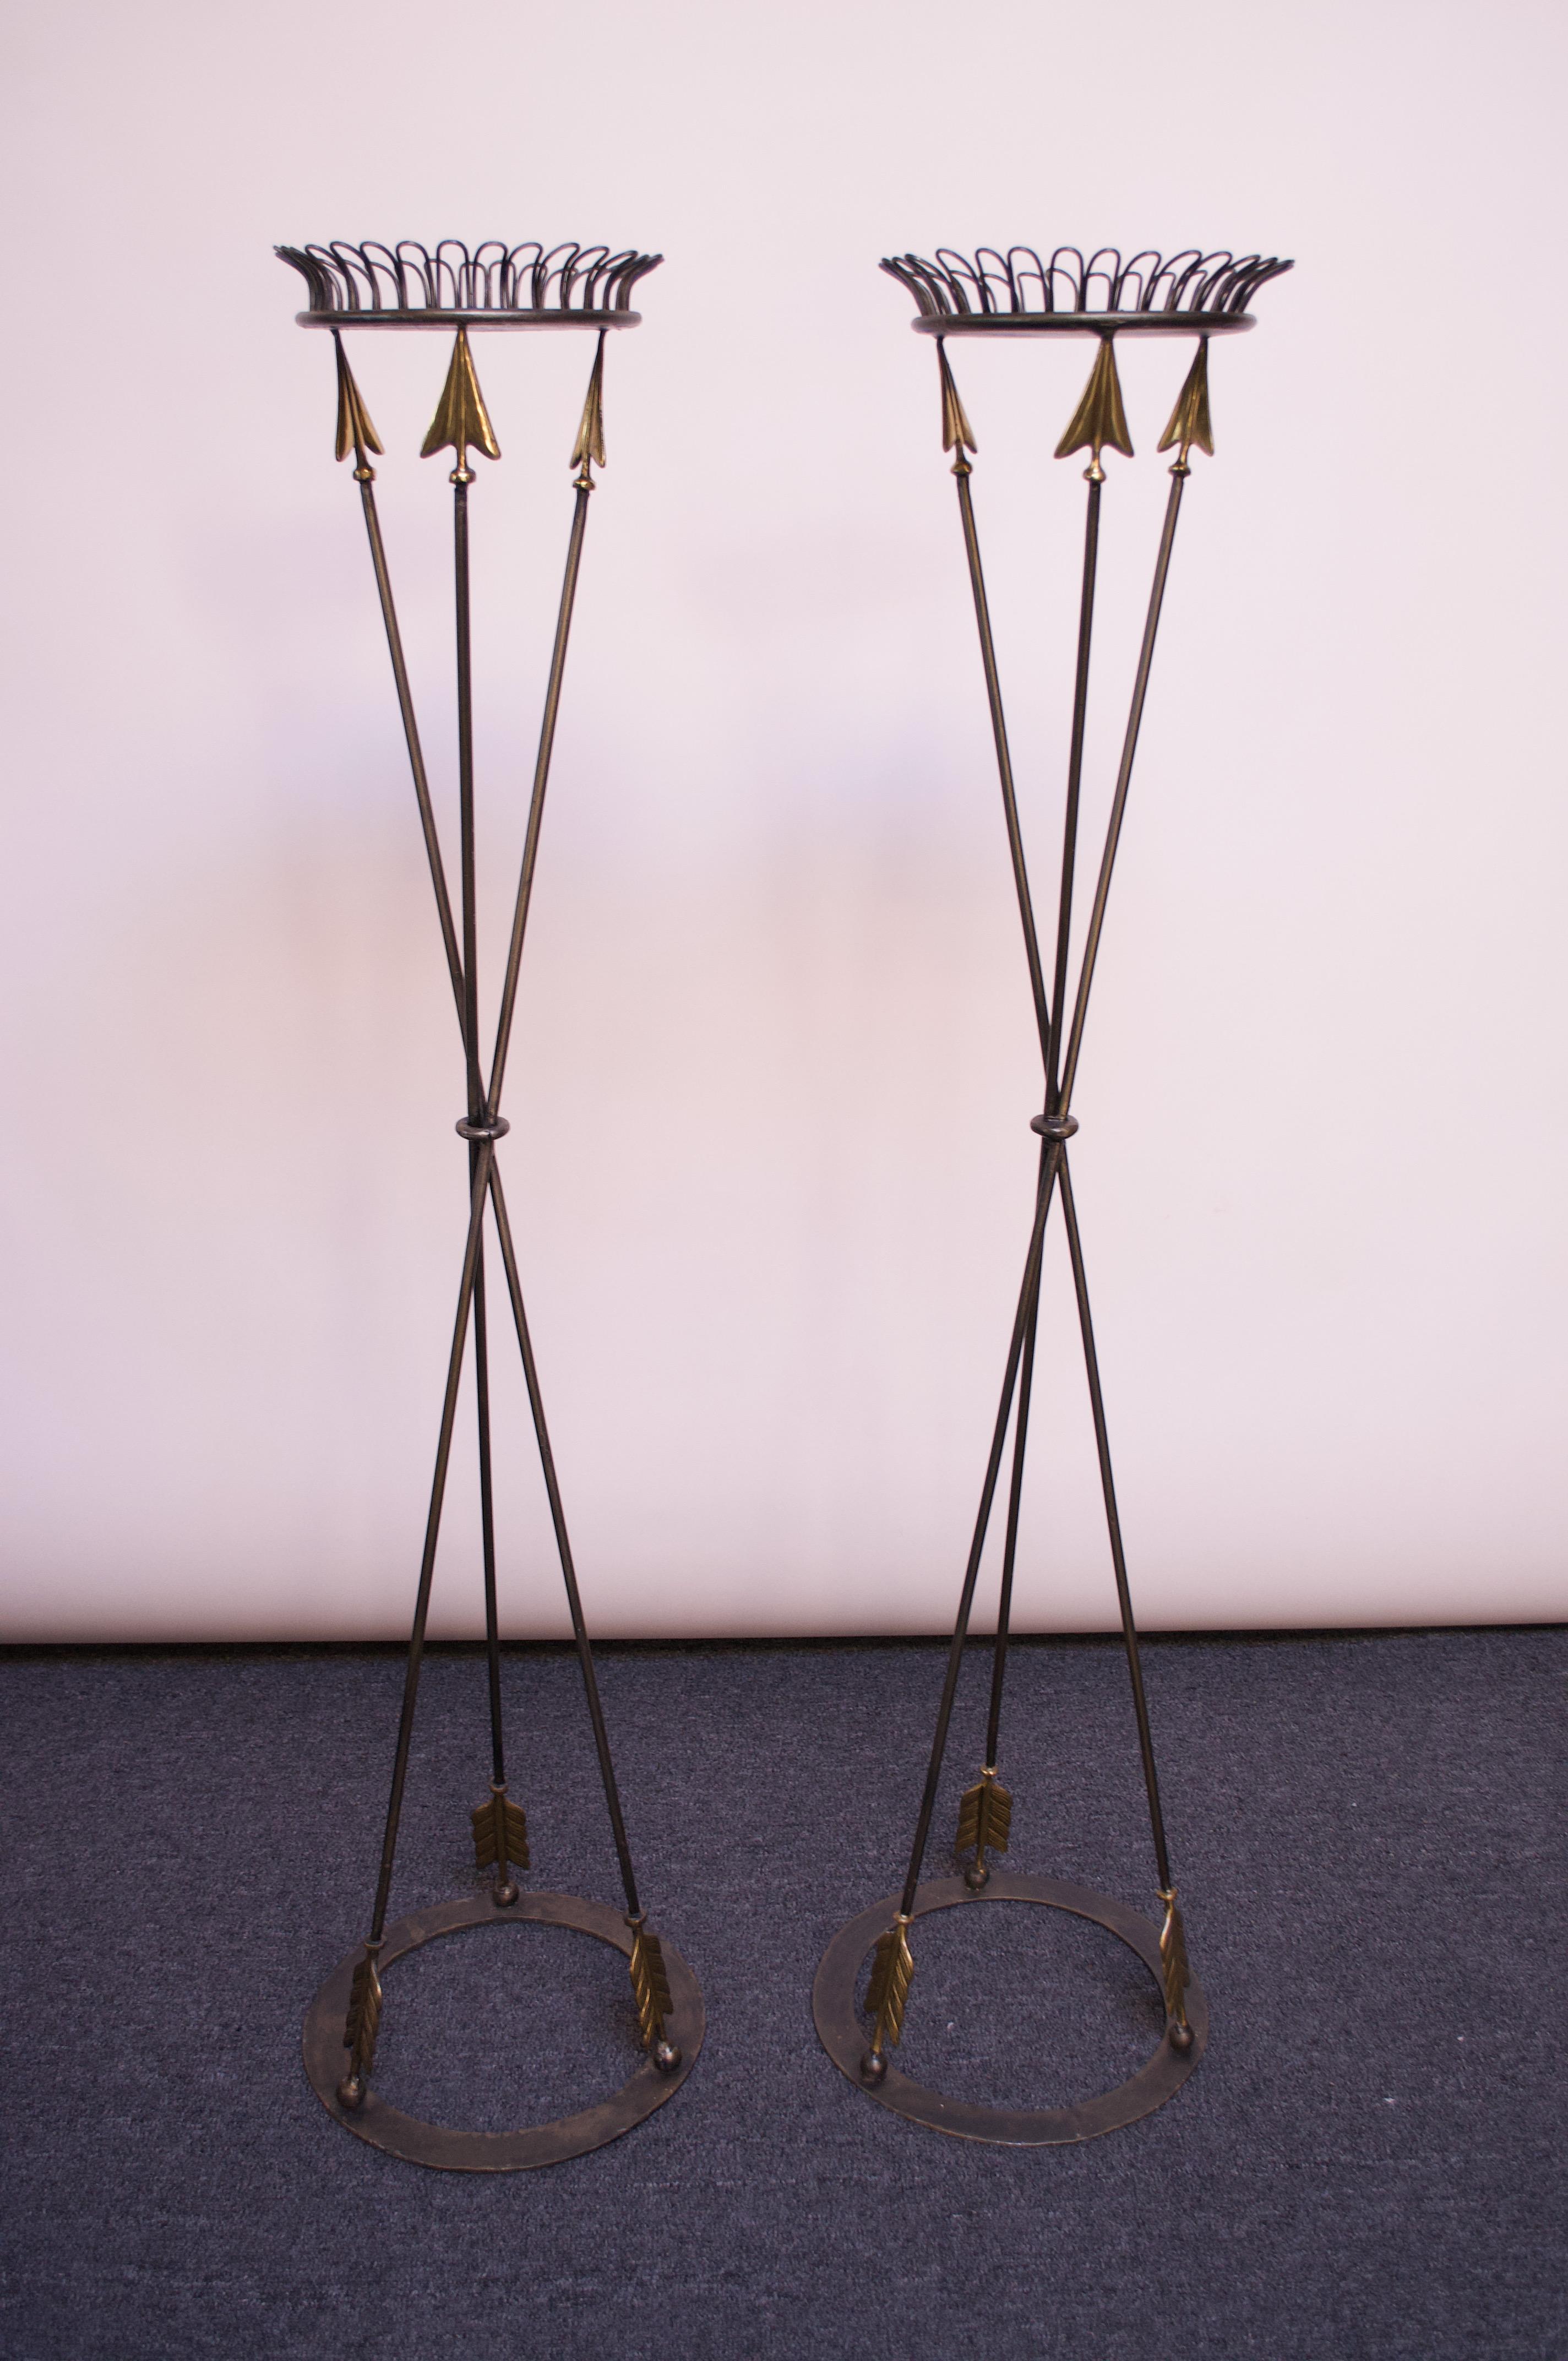 Circa 1980s Maitland Smith Neoclassical-style torchière plant stands with arrow motif. Composed of welded iron with solid brass decoration on the arrow heads and fletchings. 
Surfaces are bordered by a 'loop' design which adds a decorative element